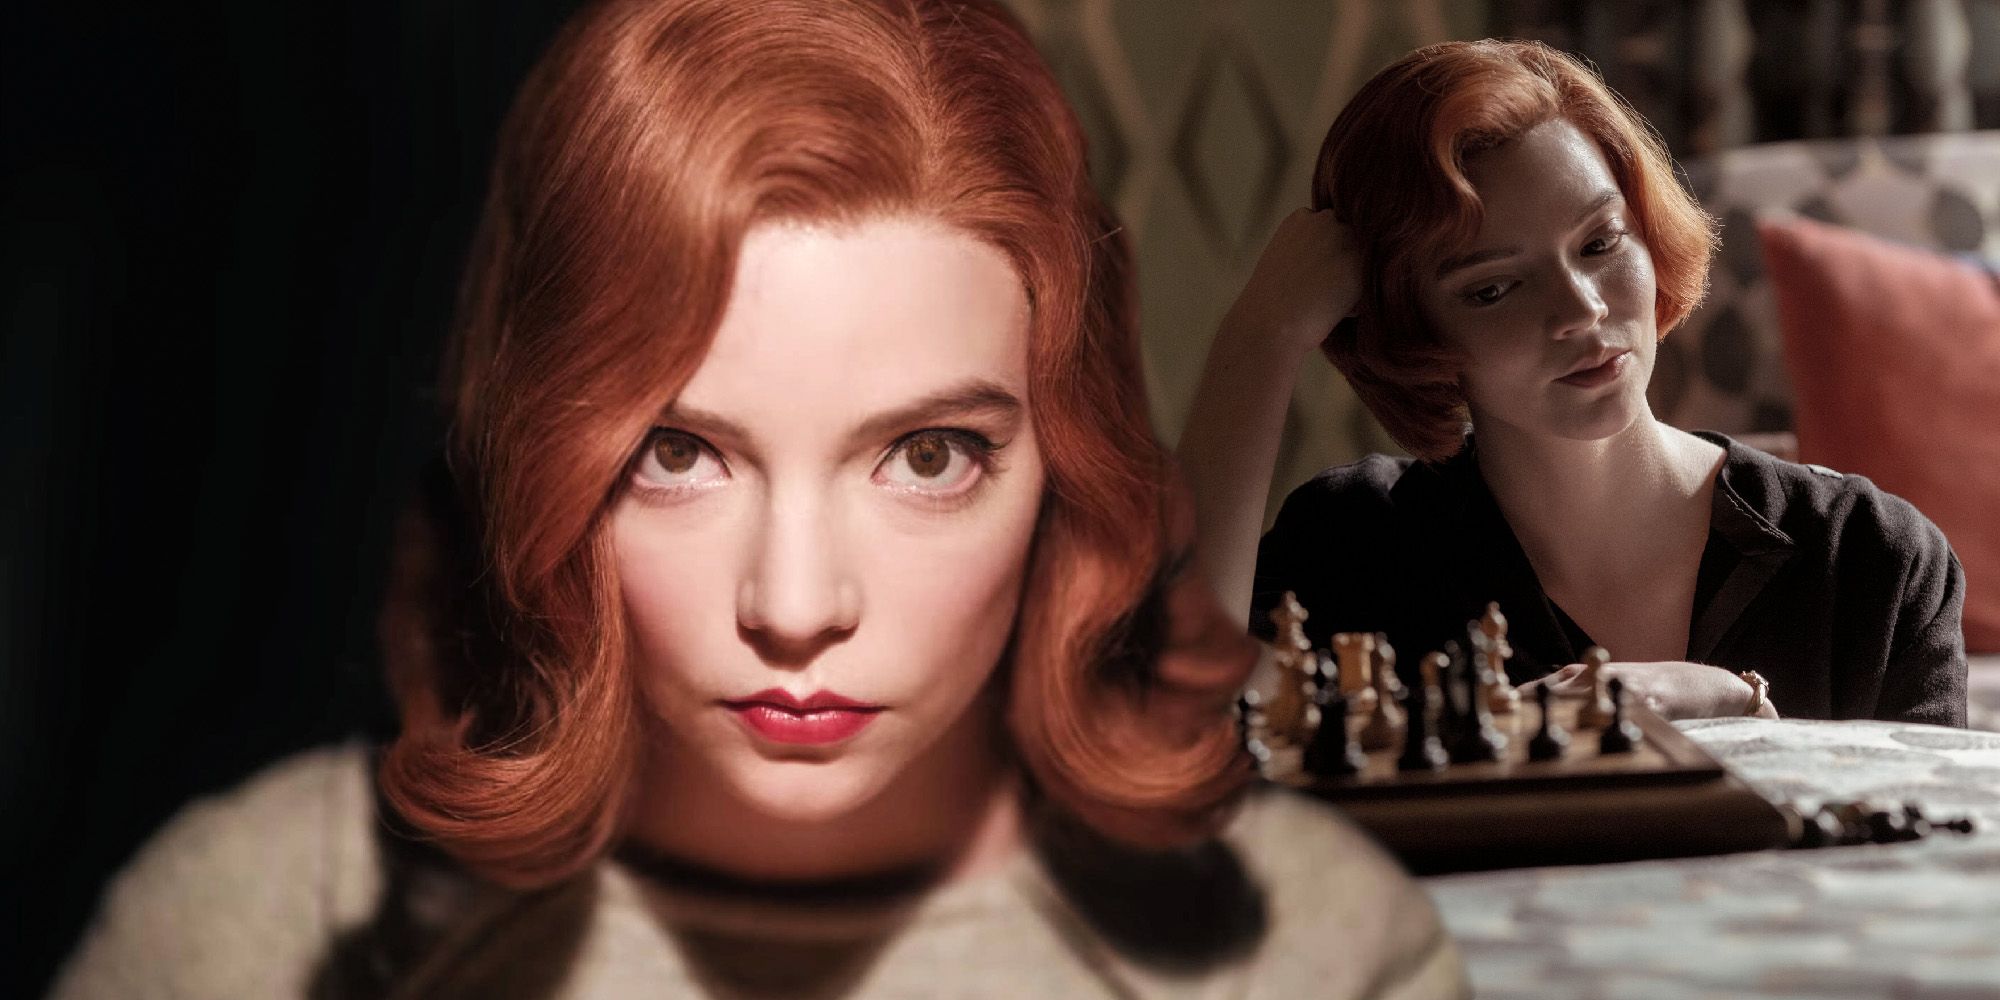 A collage of Anya Taylor Joy in The Queen's Gambit with chess pieces and looking into the camera